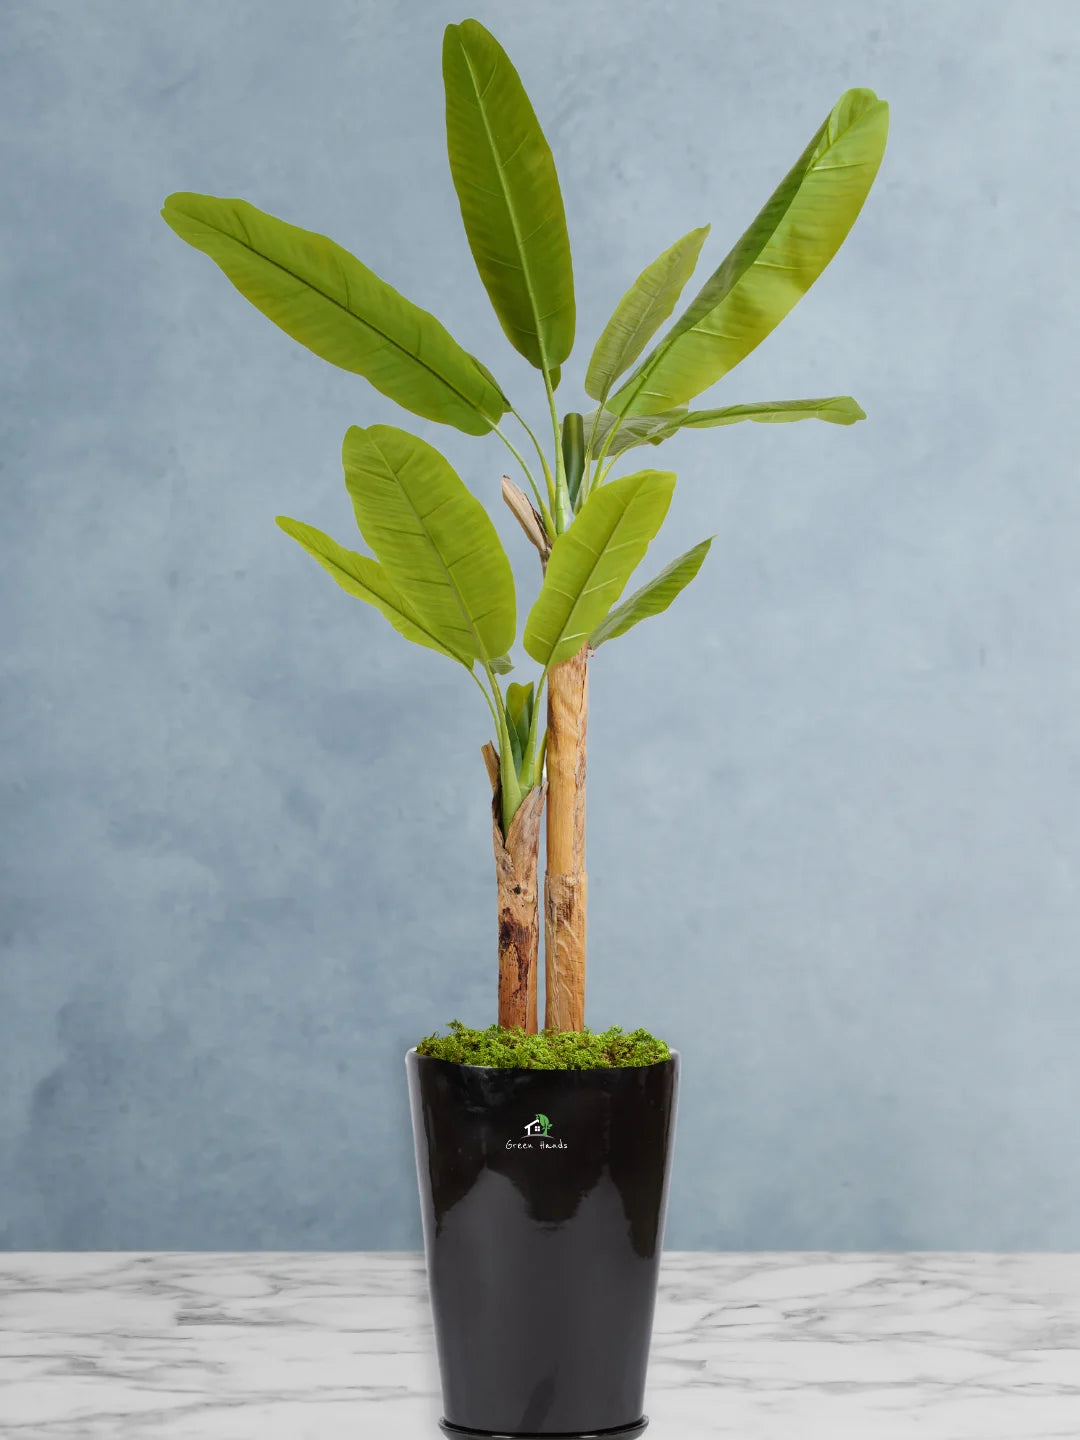 Potted-Artificial-XL-Banana-Tree-in-Premium-Glossy-White-Ceramic-Pot